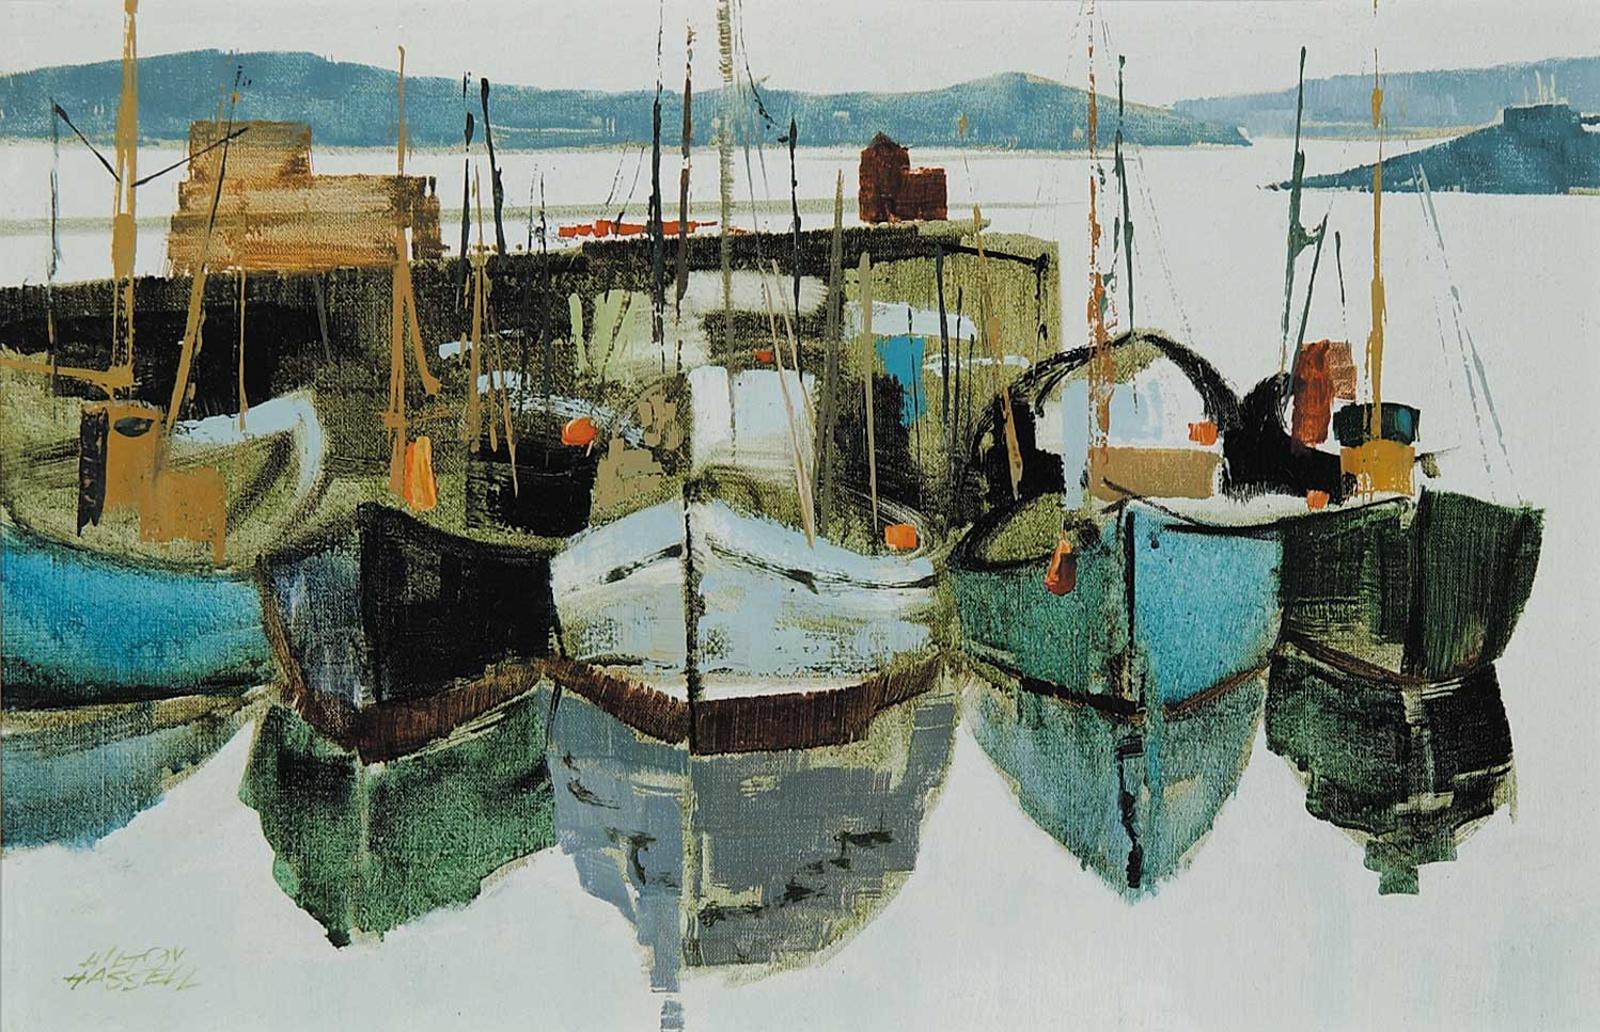 Hilton MacDonald Hassell (1910-1980) - Fishing Fleet at Killybegs, Donegal, Eire